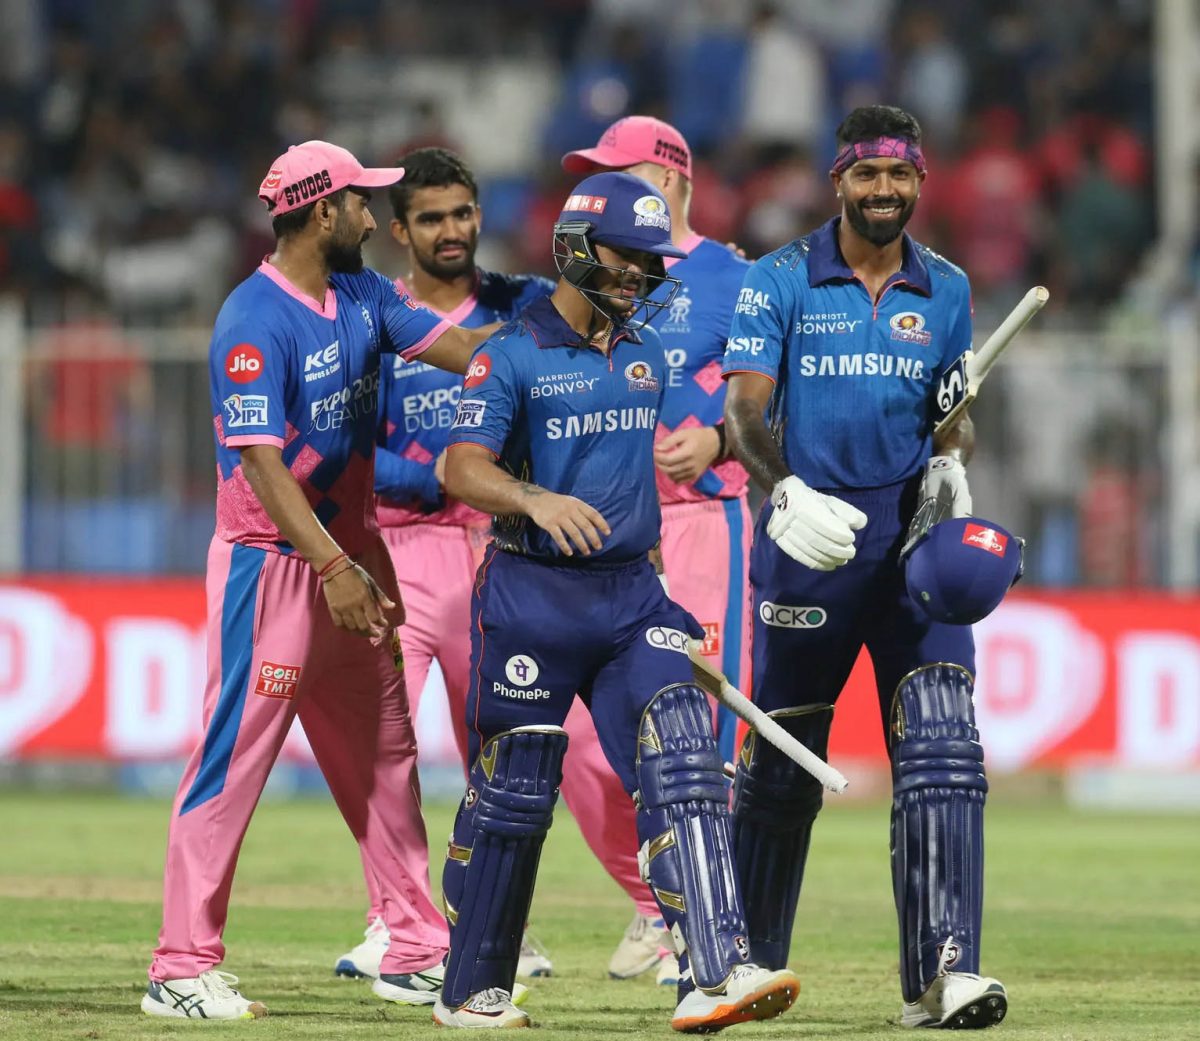 Mumbai Indians put up a dominating show and registered a clinical eight-wicket win over Rajasthan Royals